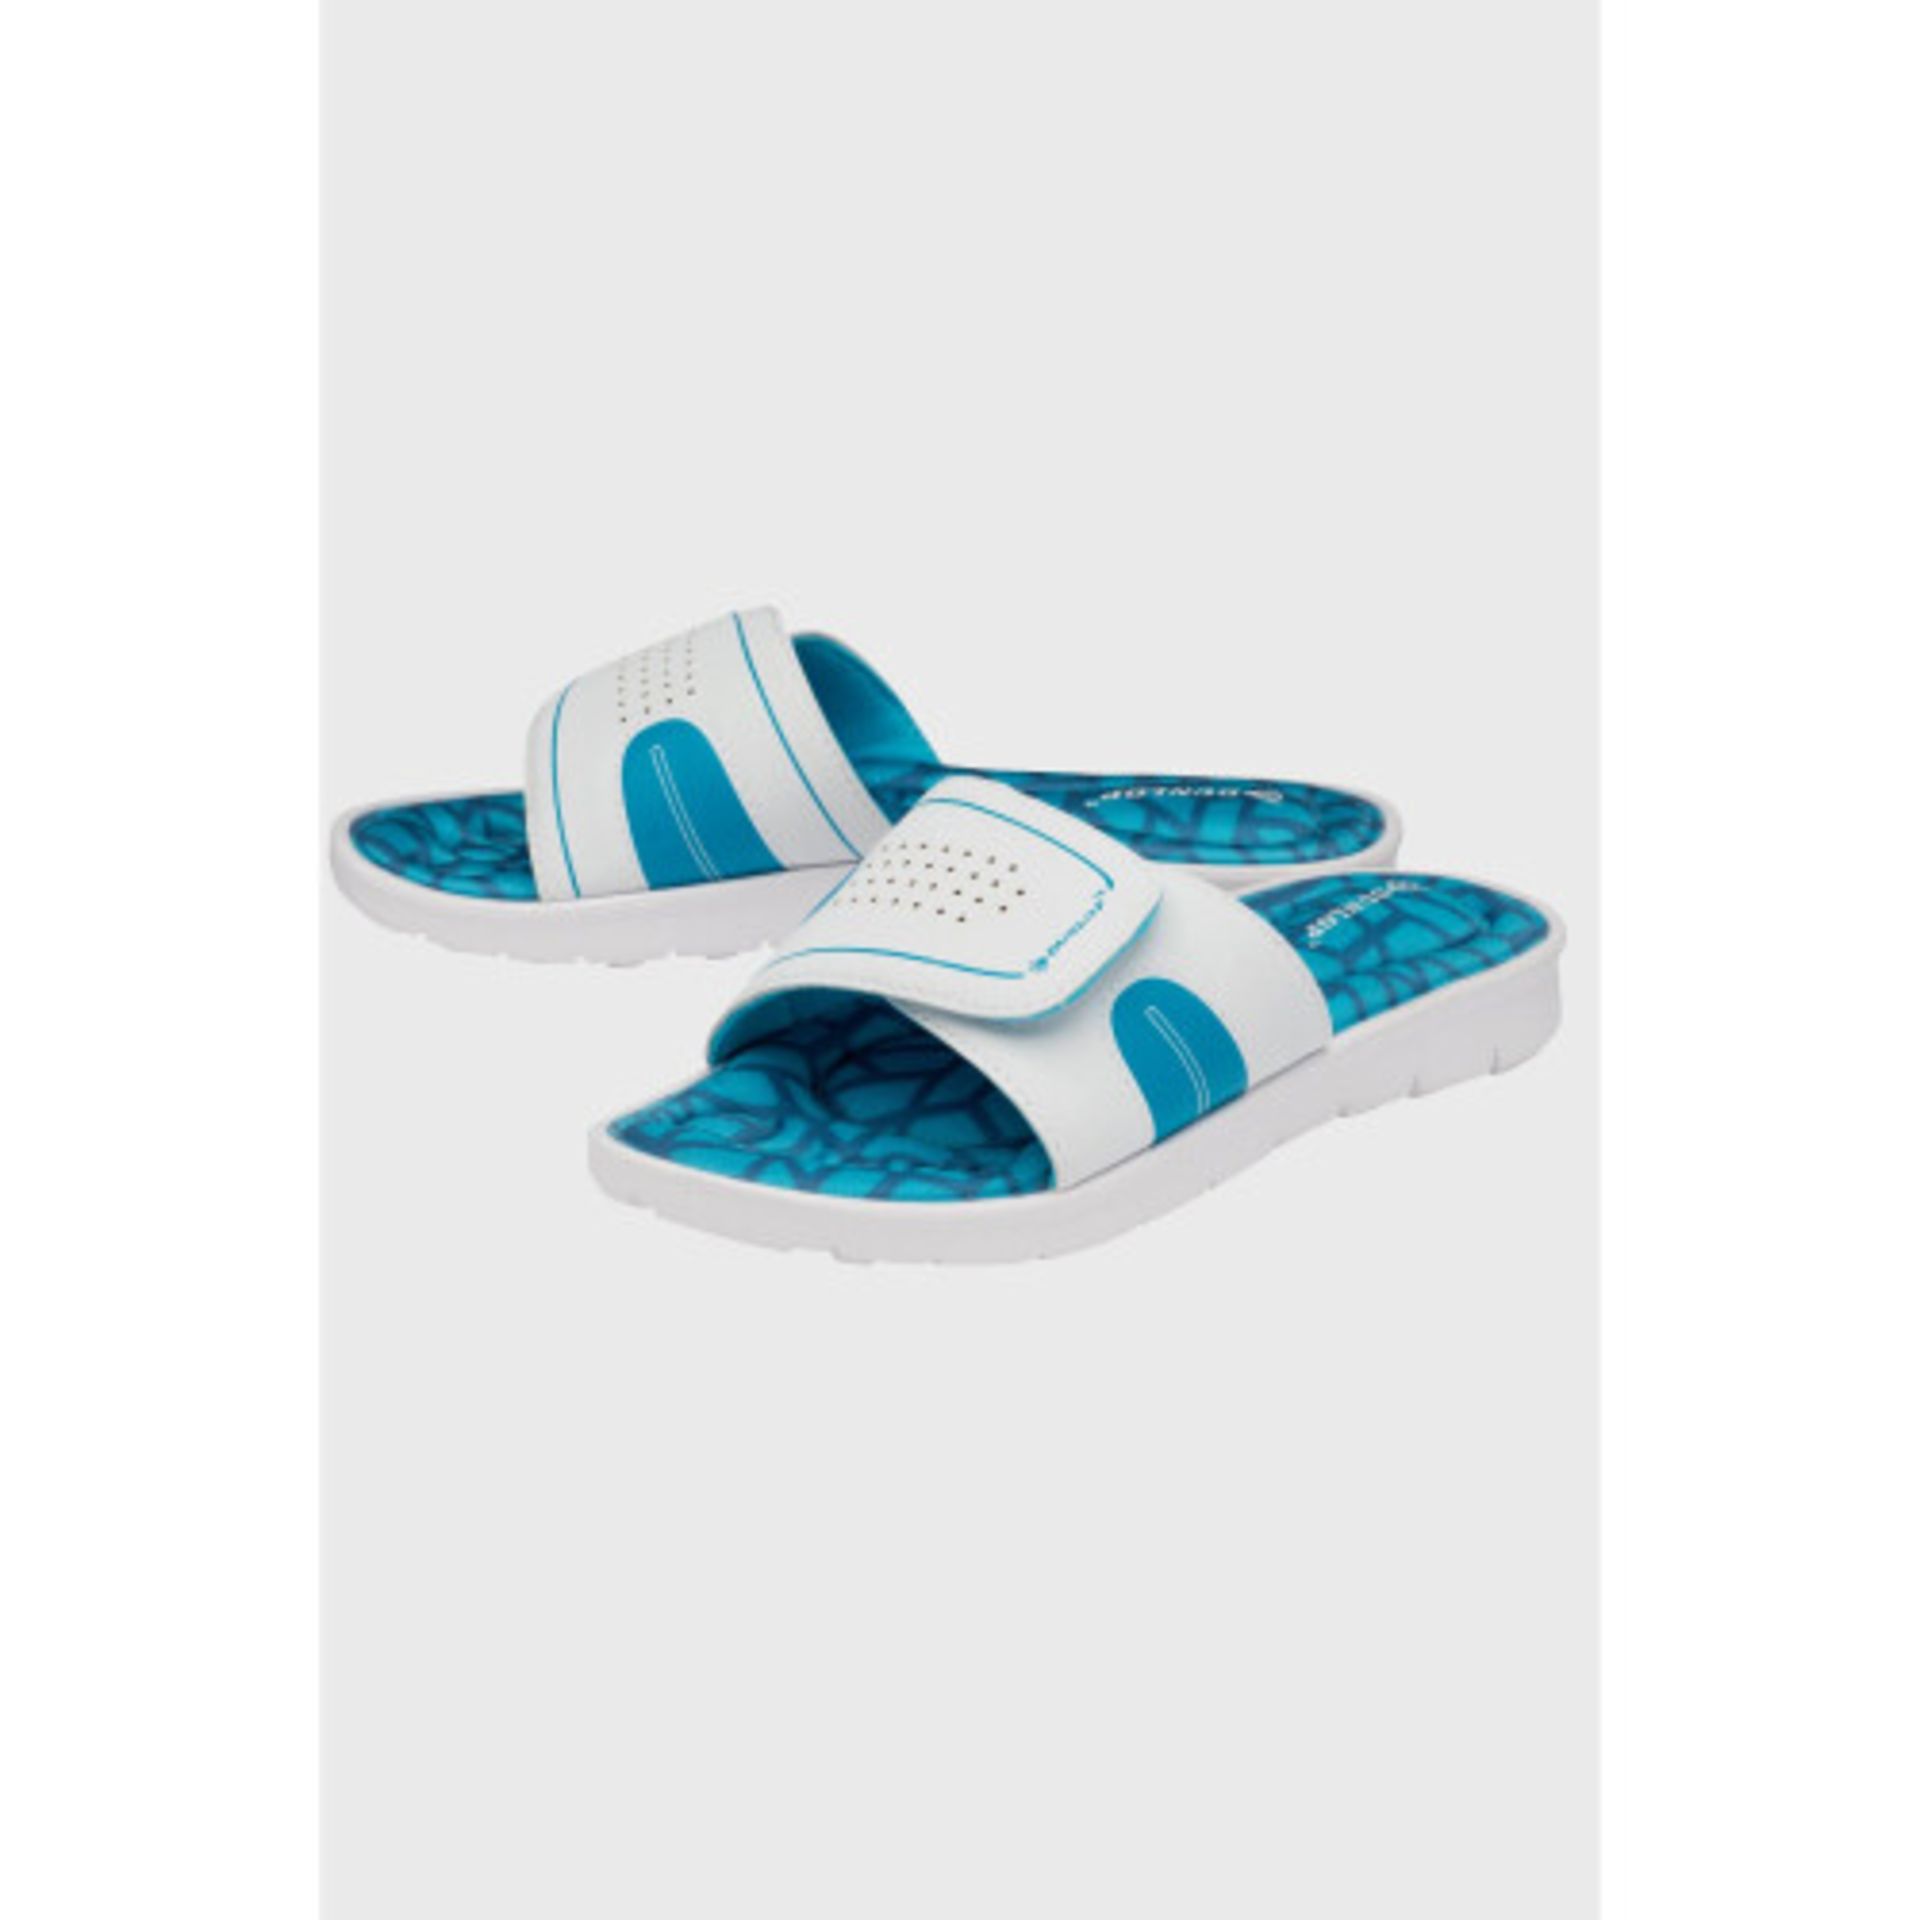 14 X BRAND NEW DUNLOP ADJUSTABLE MEMORY FOAM SLIDERS - ALL IN WHITE AND BLUE - IN VARIOUS SIZES TO